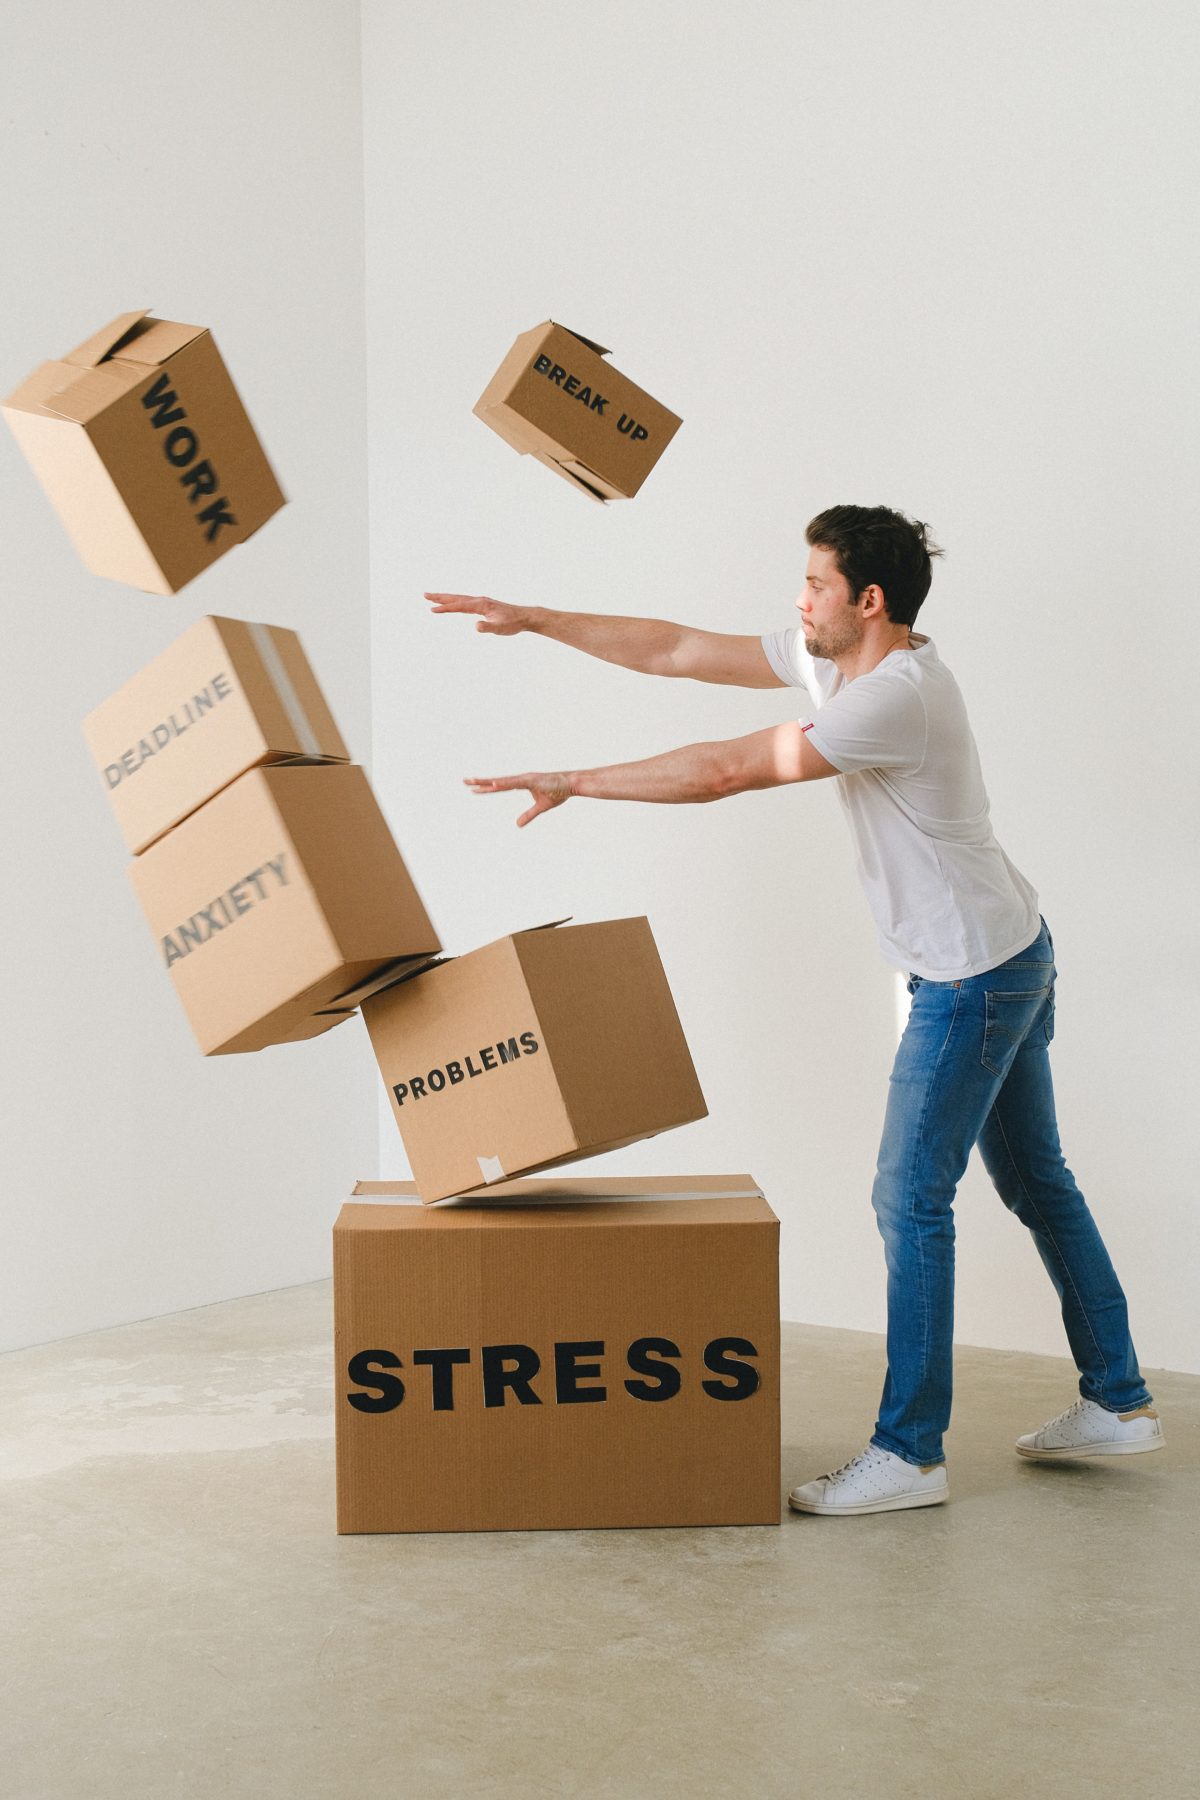 Man toppling boxes labeled "Break up, "Work,," "Deadline," "Anxiety," "Problems," and "Stress."